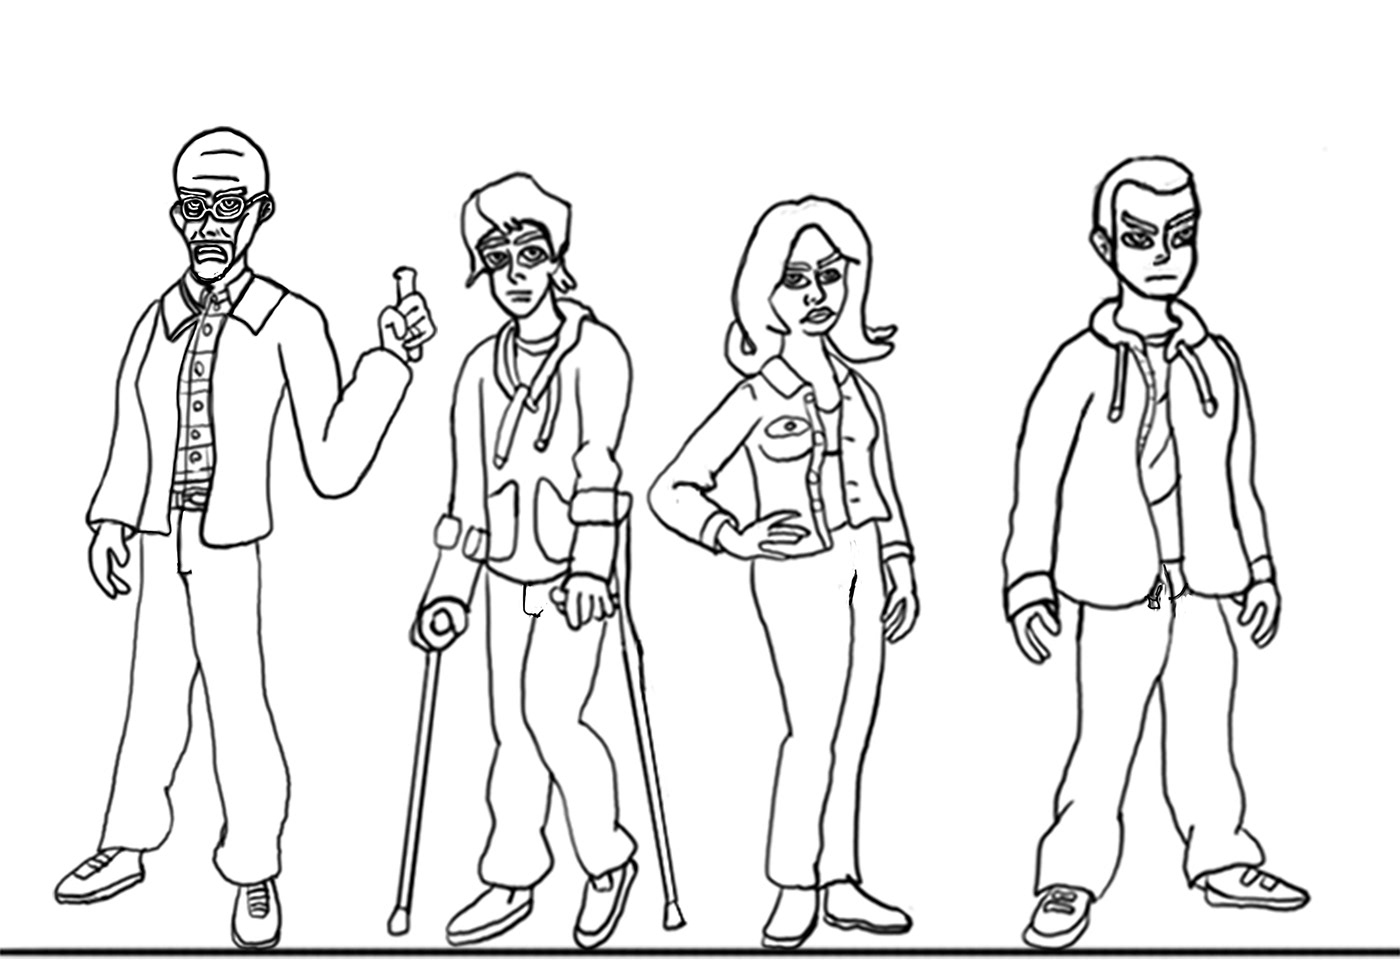 Character Designs for breaking Bad on Behance